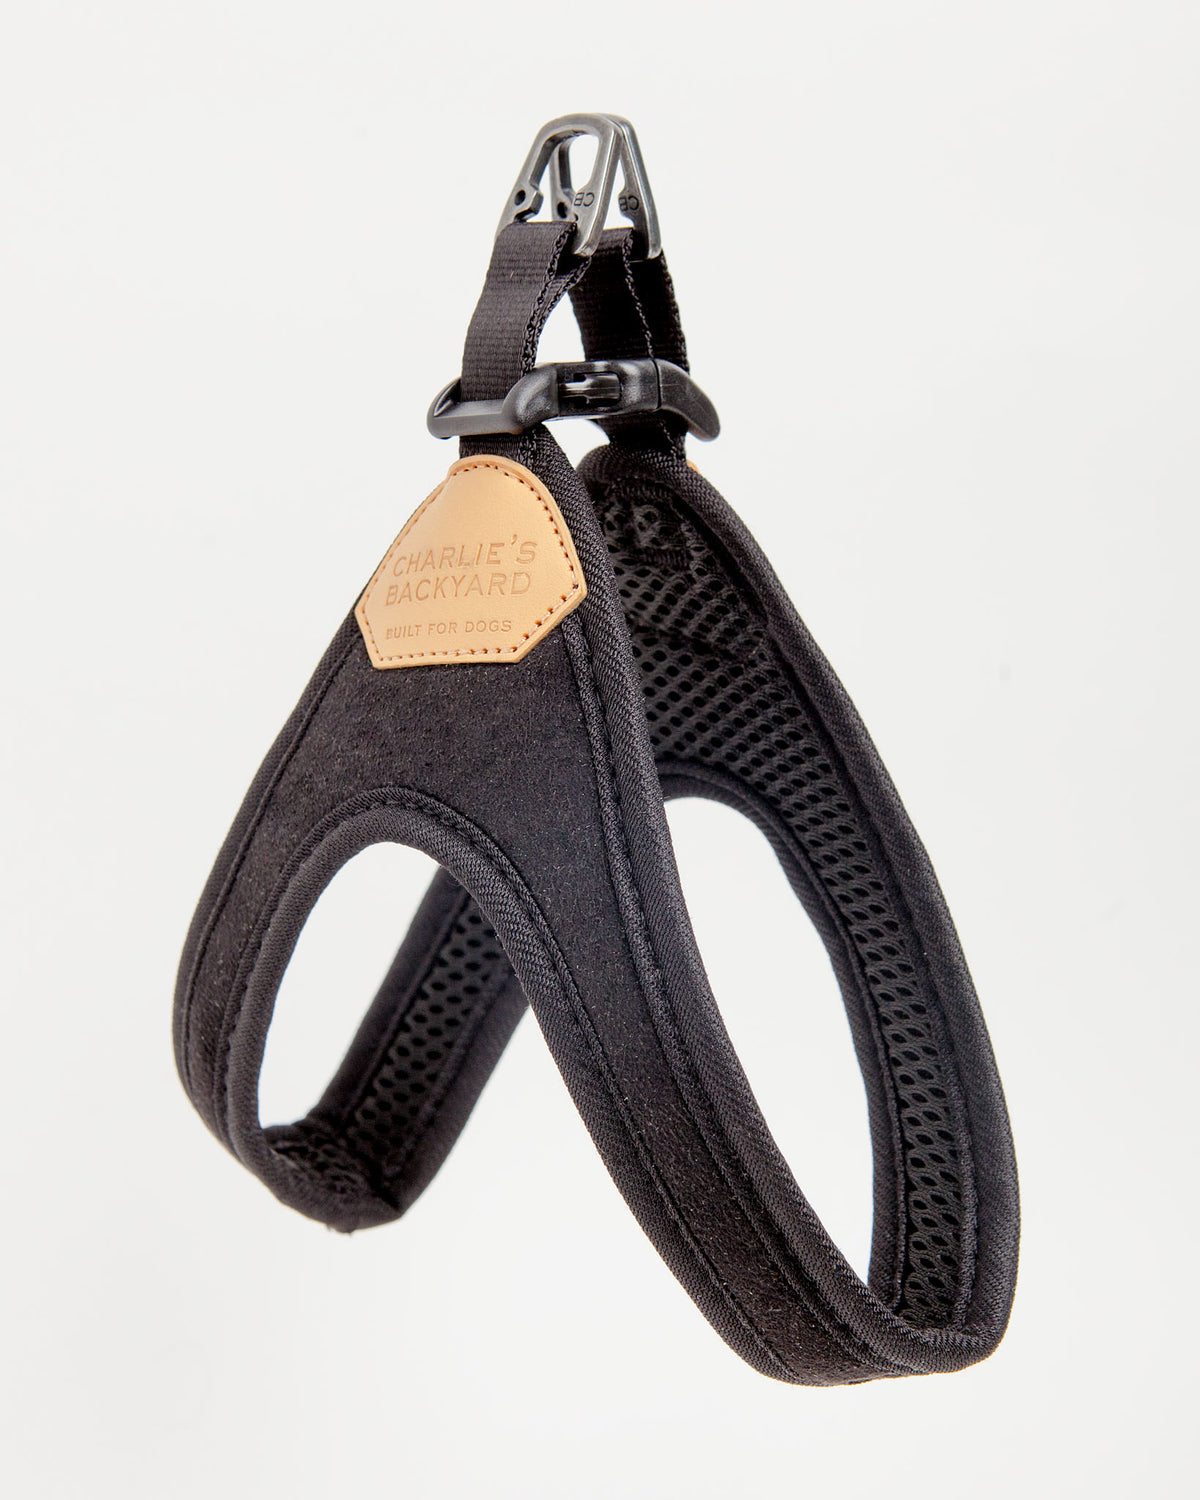 CHARLIE'S BACKYARD | Buckle Up Easy Dog Harness in Black | DOG  CO.